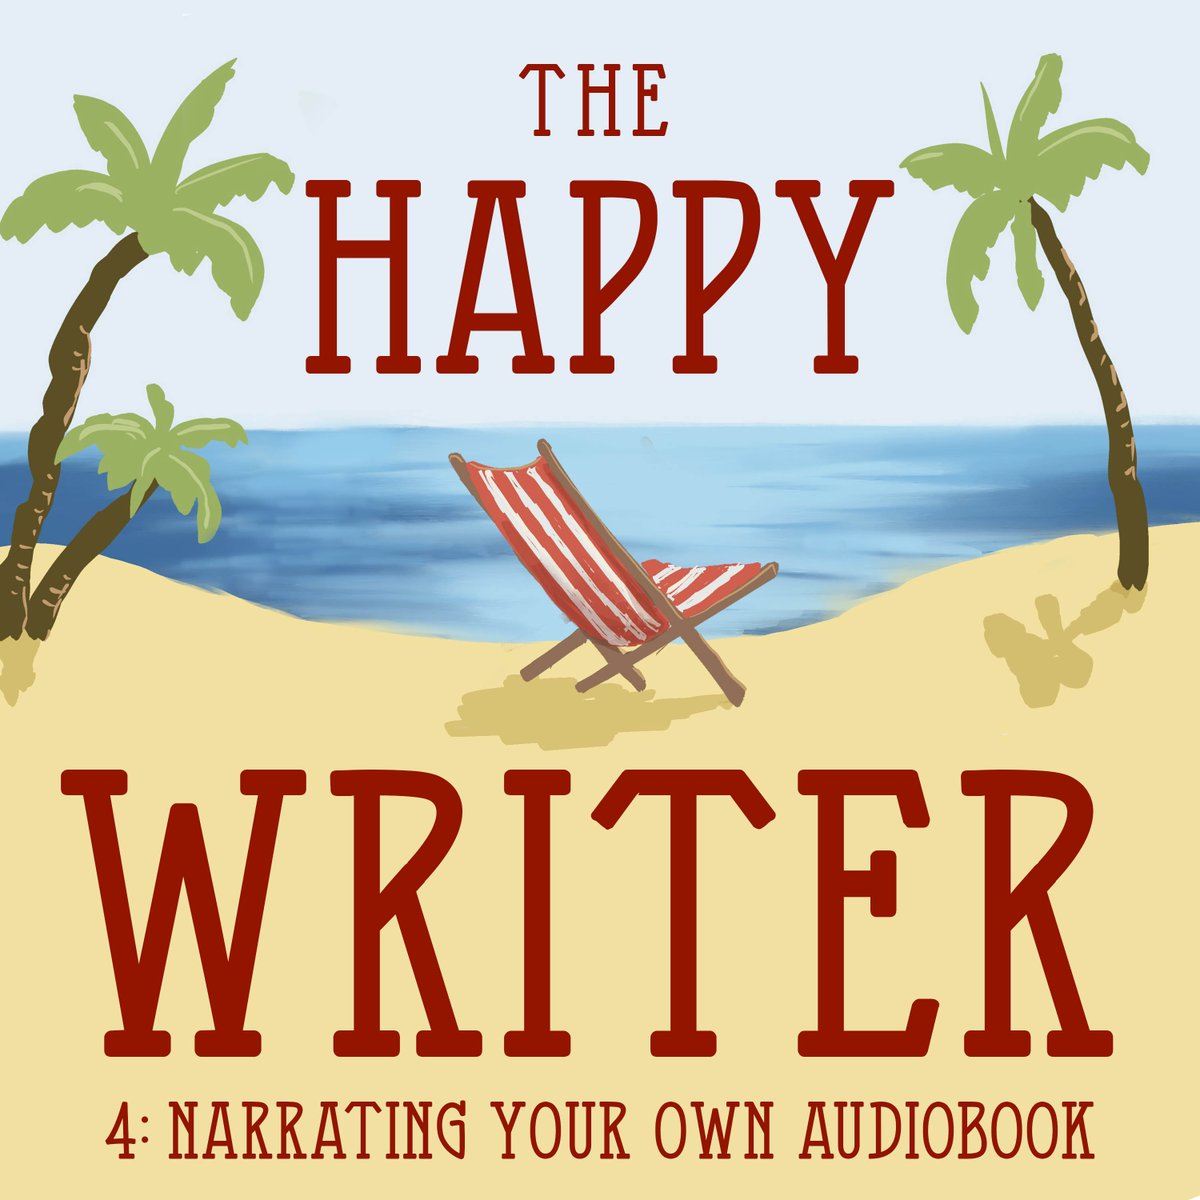 The Happy Writer 4: Narrating Your Own Audiobooks. #IARTG Podcast anchor.fm/patty-jansen/e…